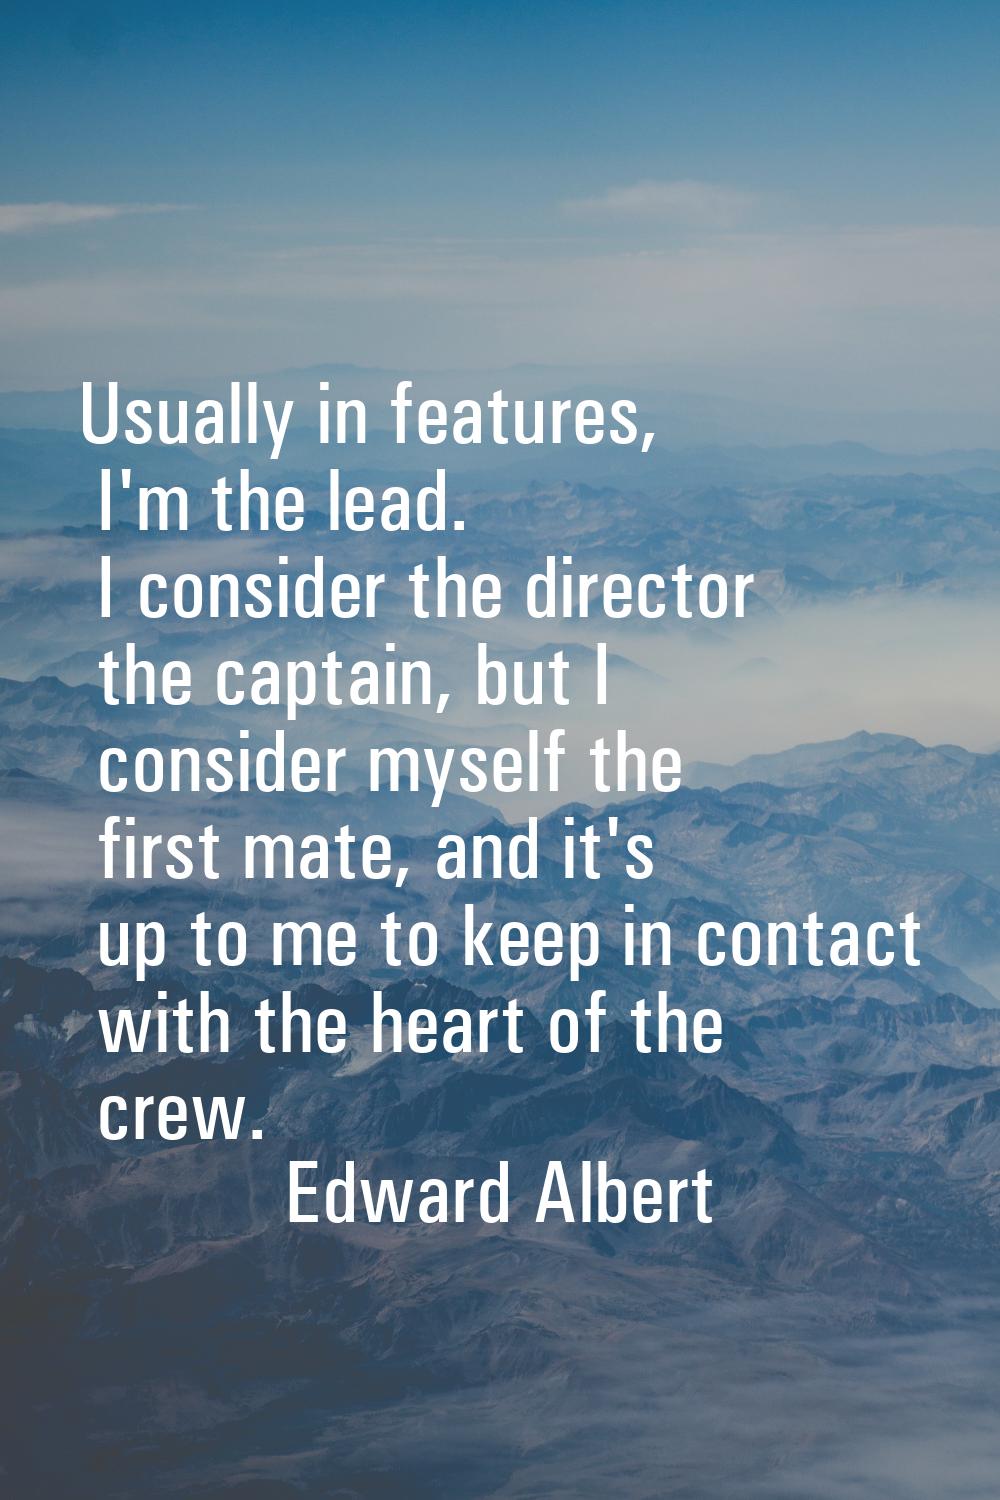 Usually in features, I'm the lead. I consider the director the captain, but I consider myself the f